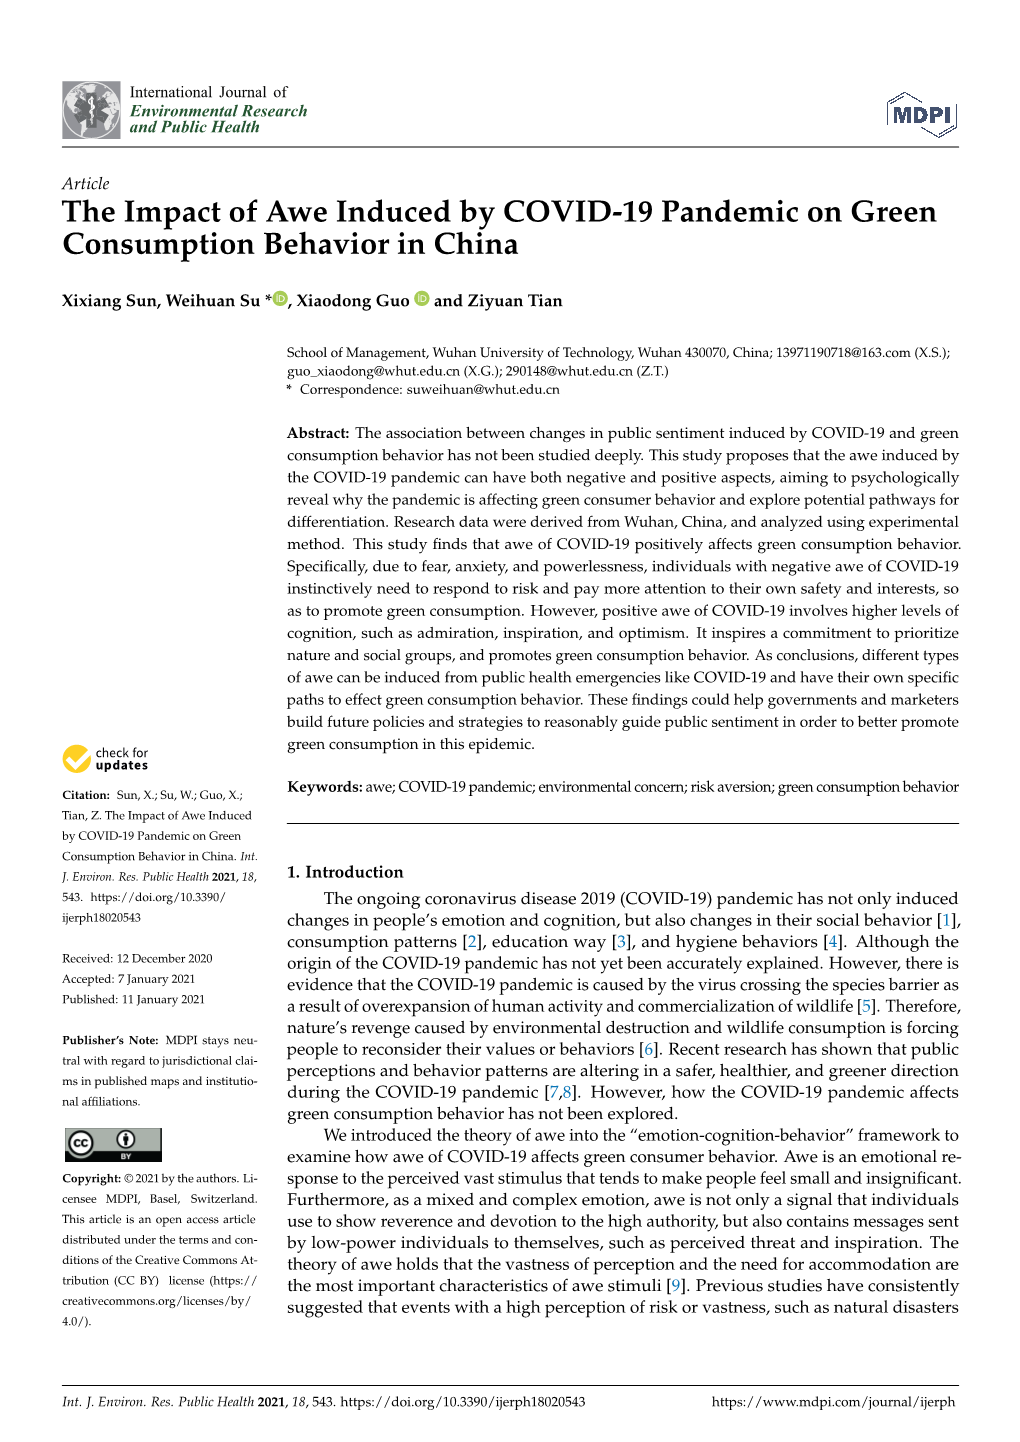 The Impact of Awe Induced by COVID-19 Pandemic on Green Consumption Behavior in China